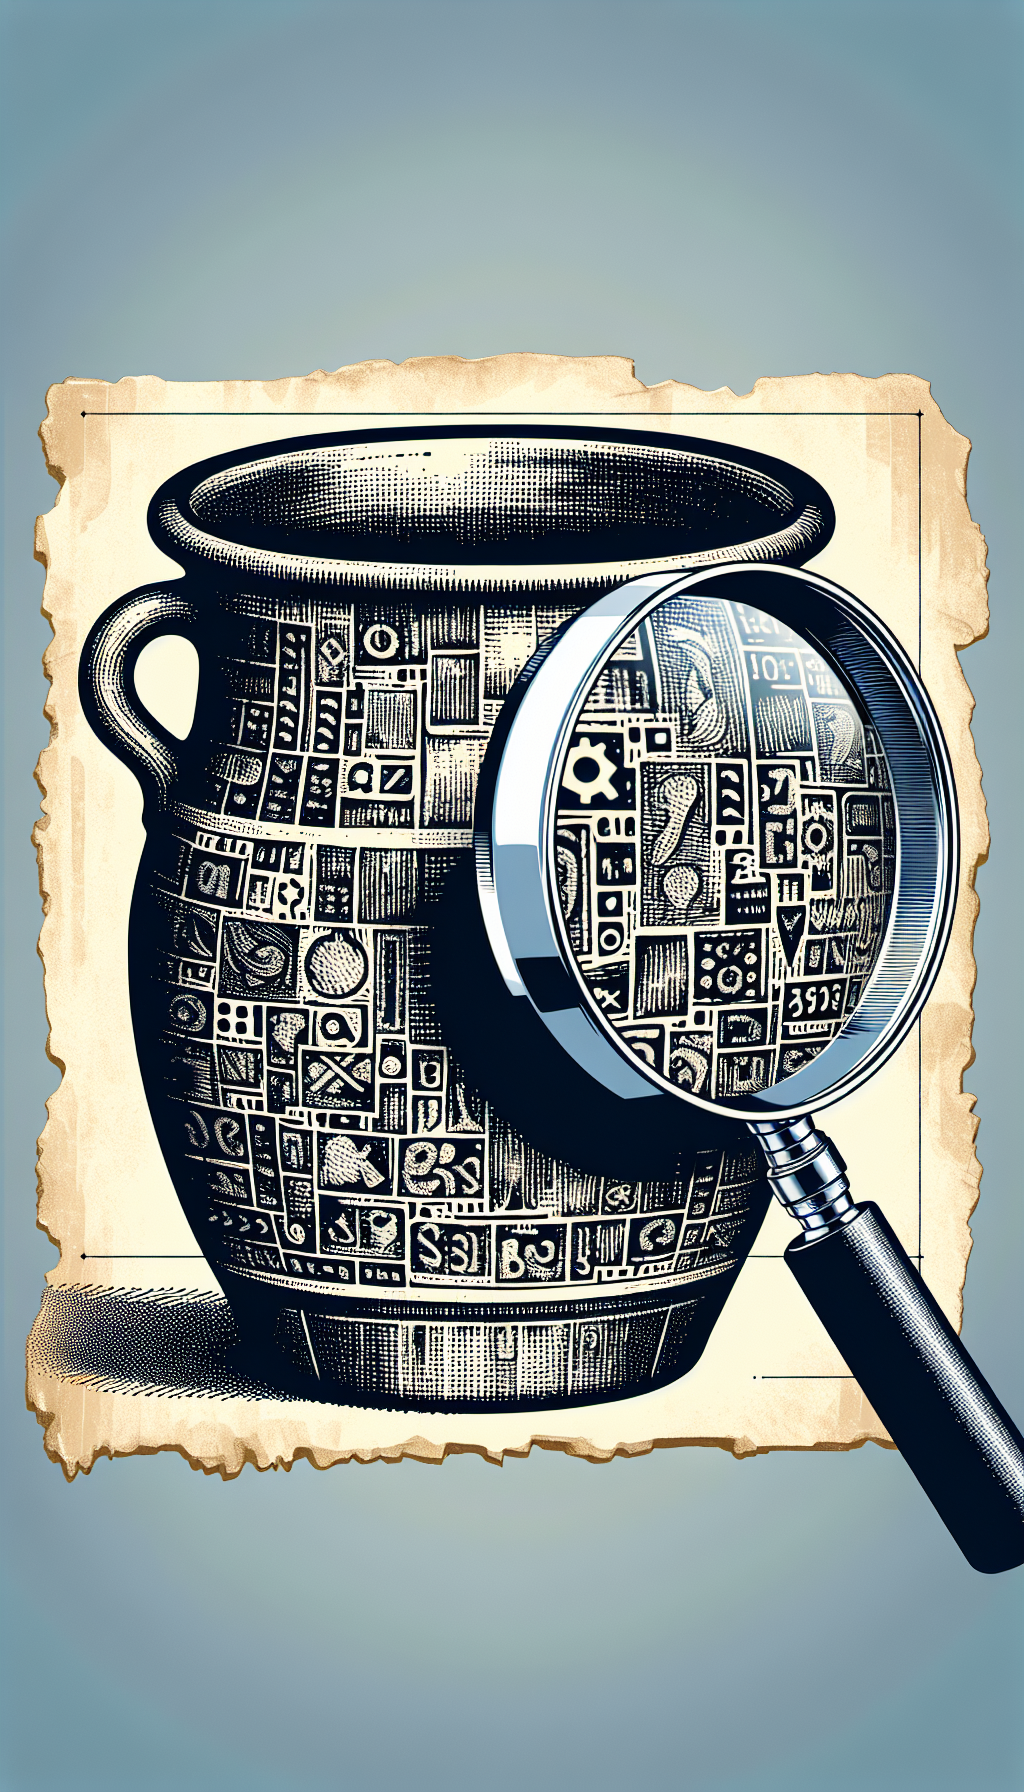 An illustration depicts a magnifying glass revealing hidden marks and stamps on a vintage crock, with different styles of these identifiers subtly transitioning into price tags, signifying the crock's value. The image juxtaposes a classic woodcut for the crock against a sleek, digital style for the magnifying glass and price tags, symbolizing the blend of history and modern-day antique appraisal.